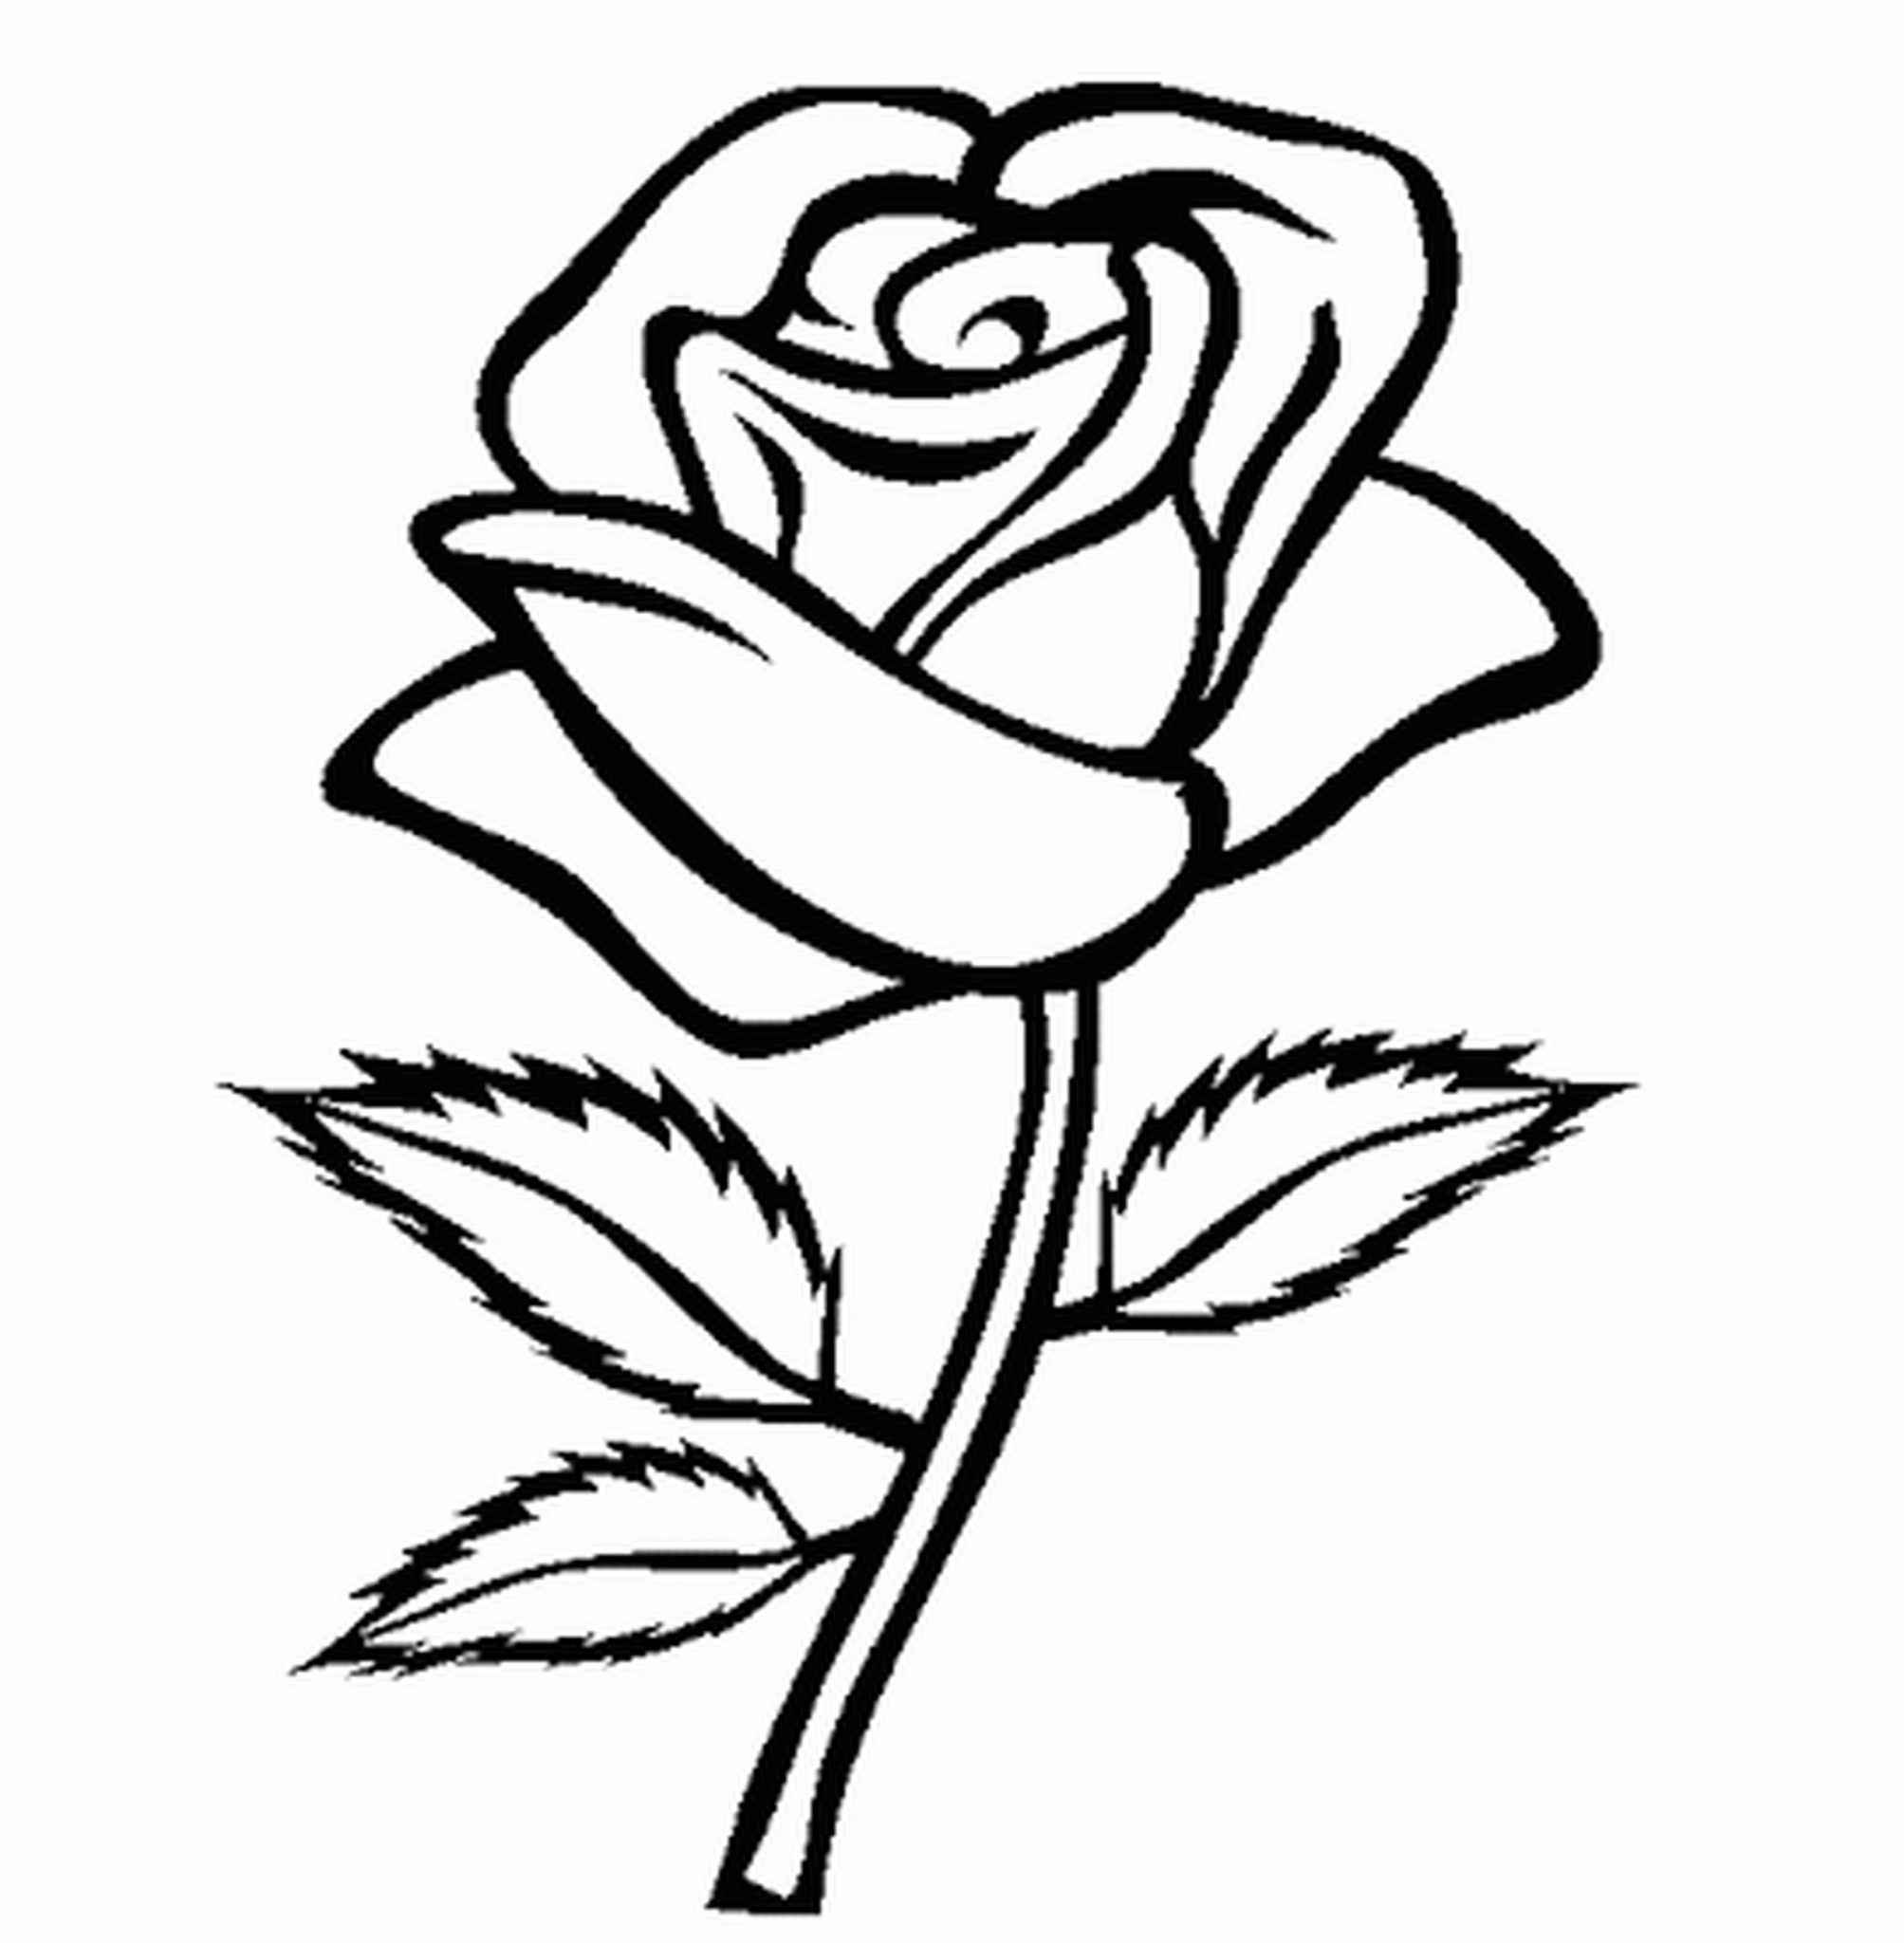 coloring-pages-for-girls-flowers | | BestAppsForKids.com